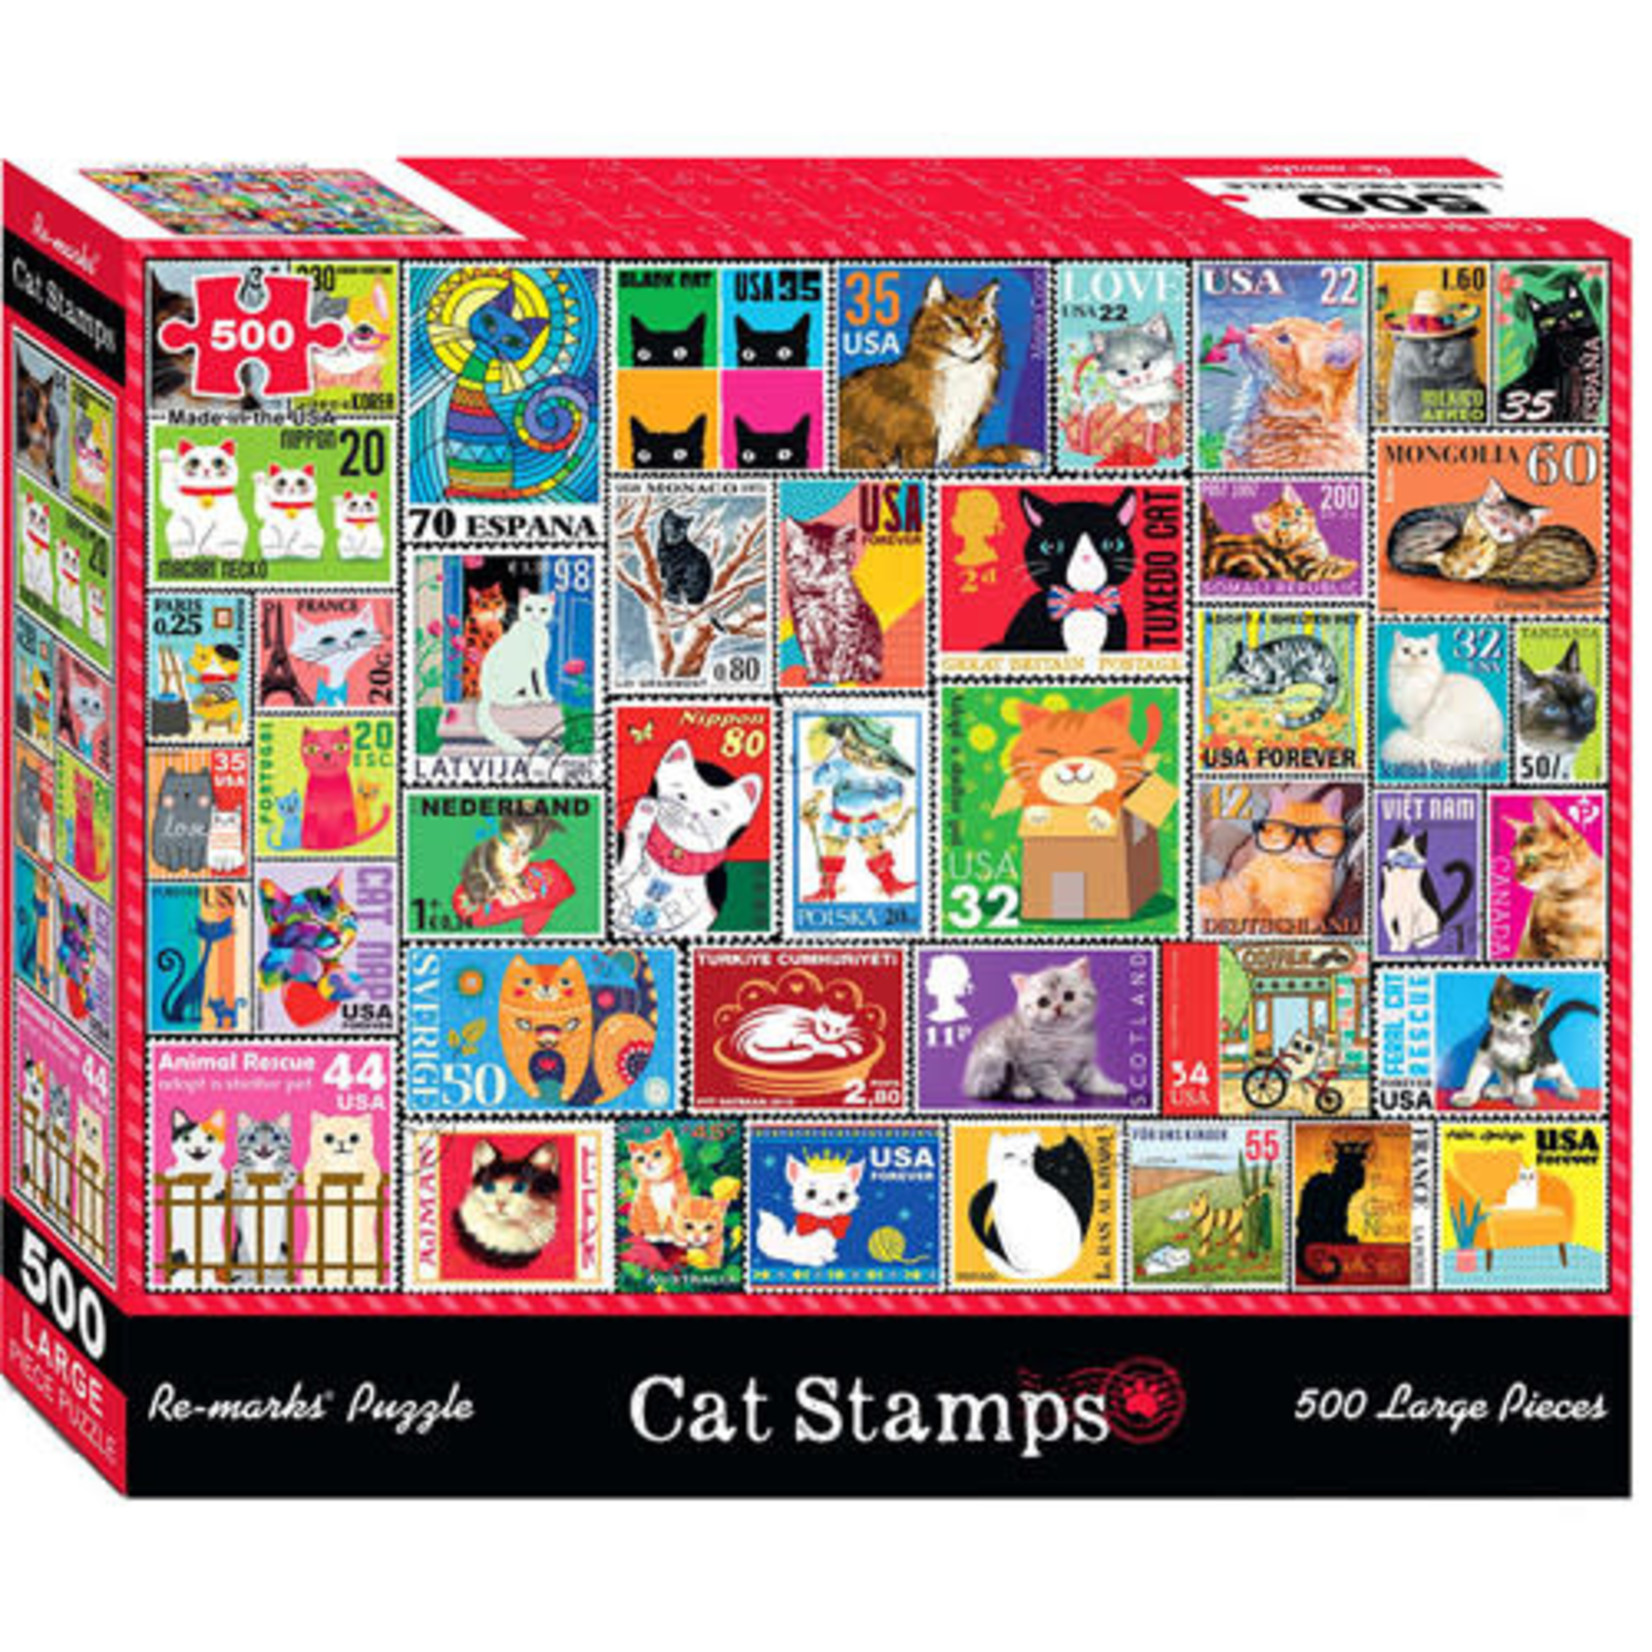 Remarks Puzzles 500 piece Cat Stamp Puzzle